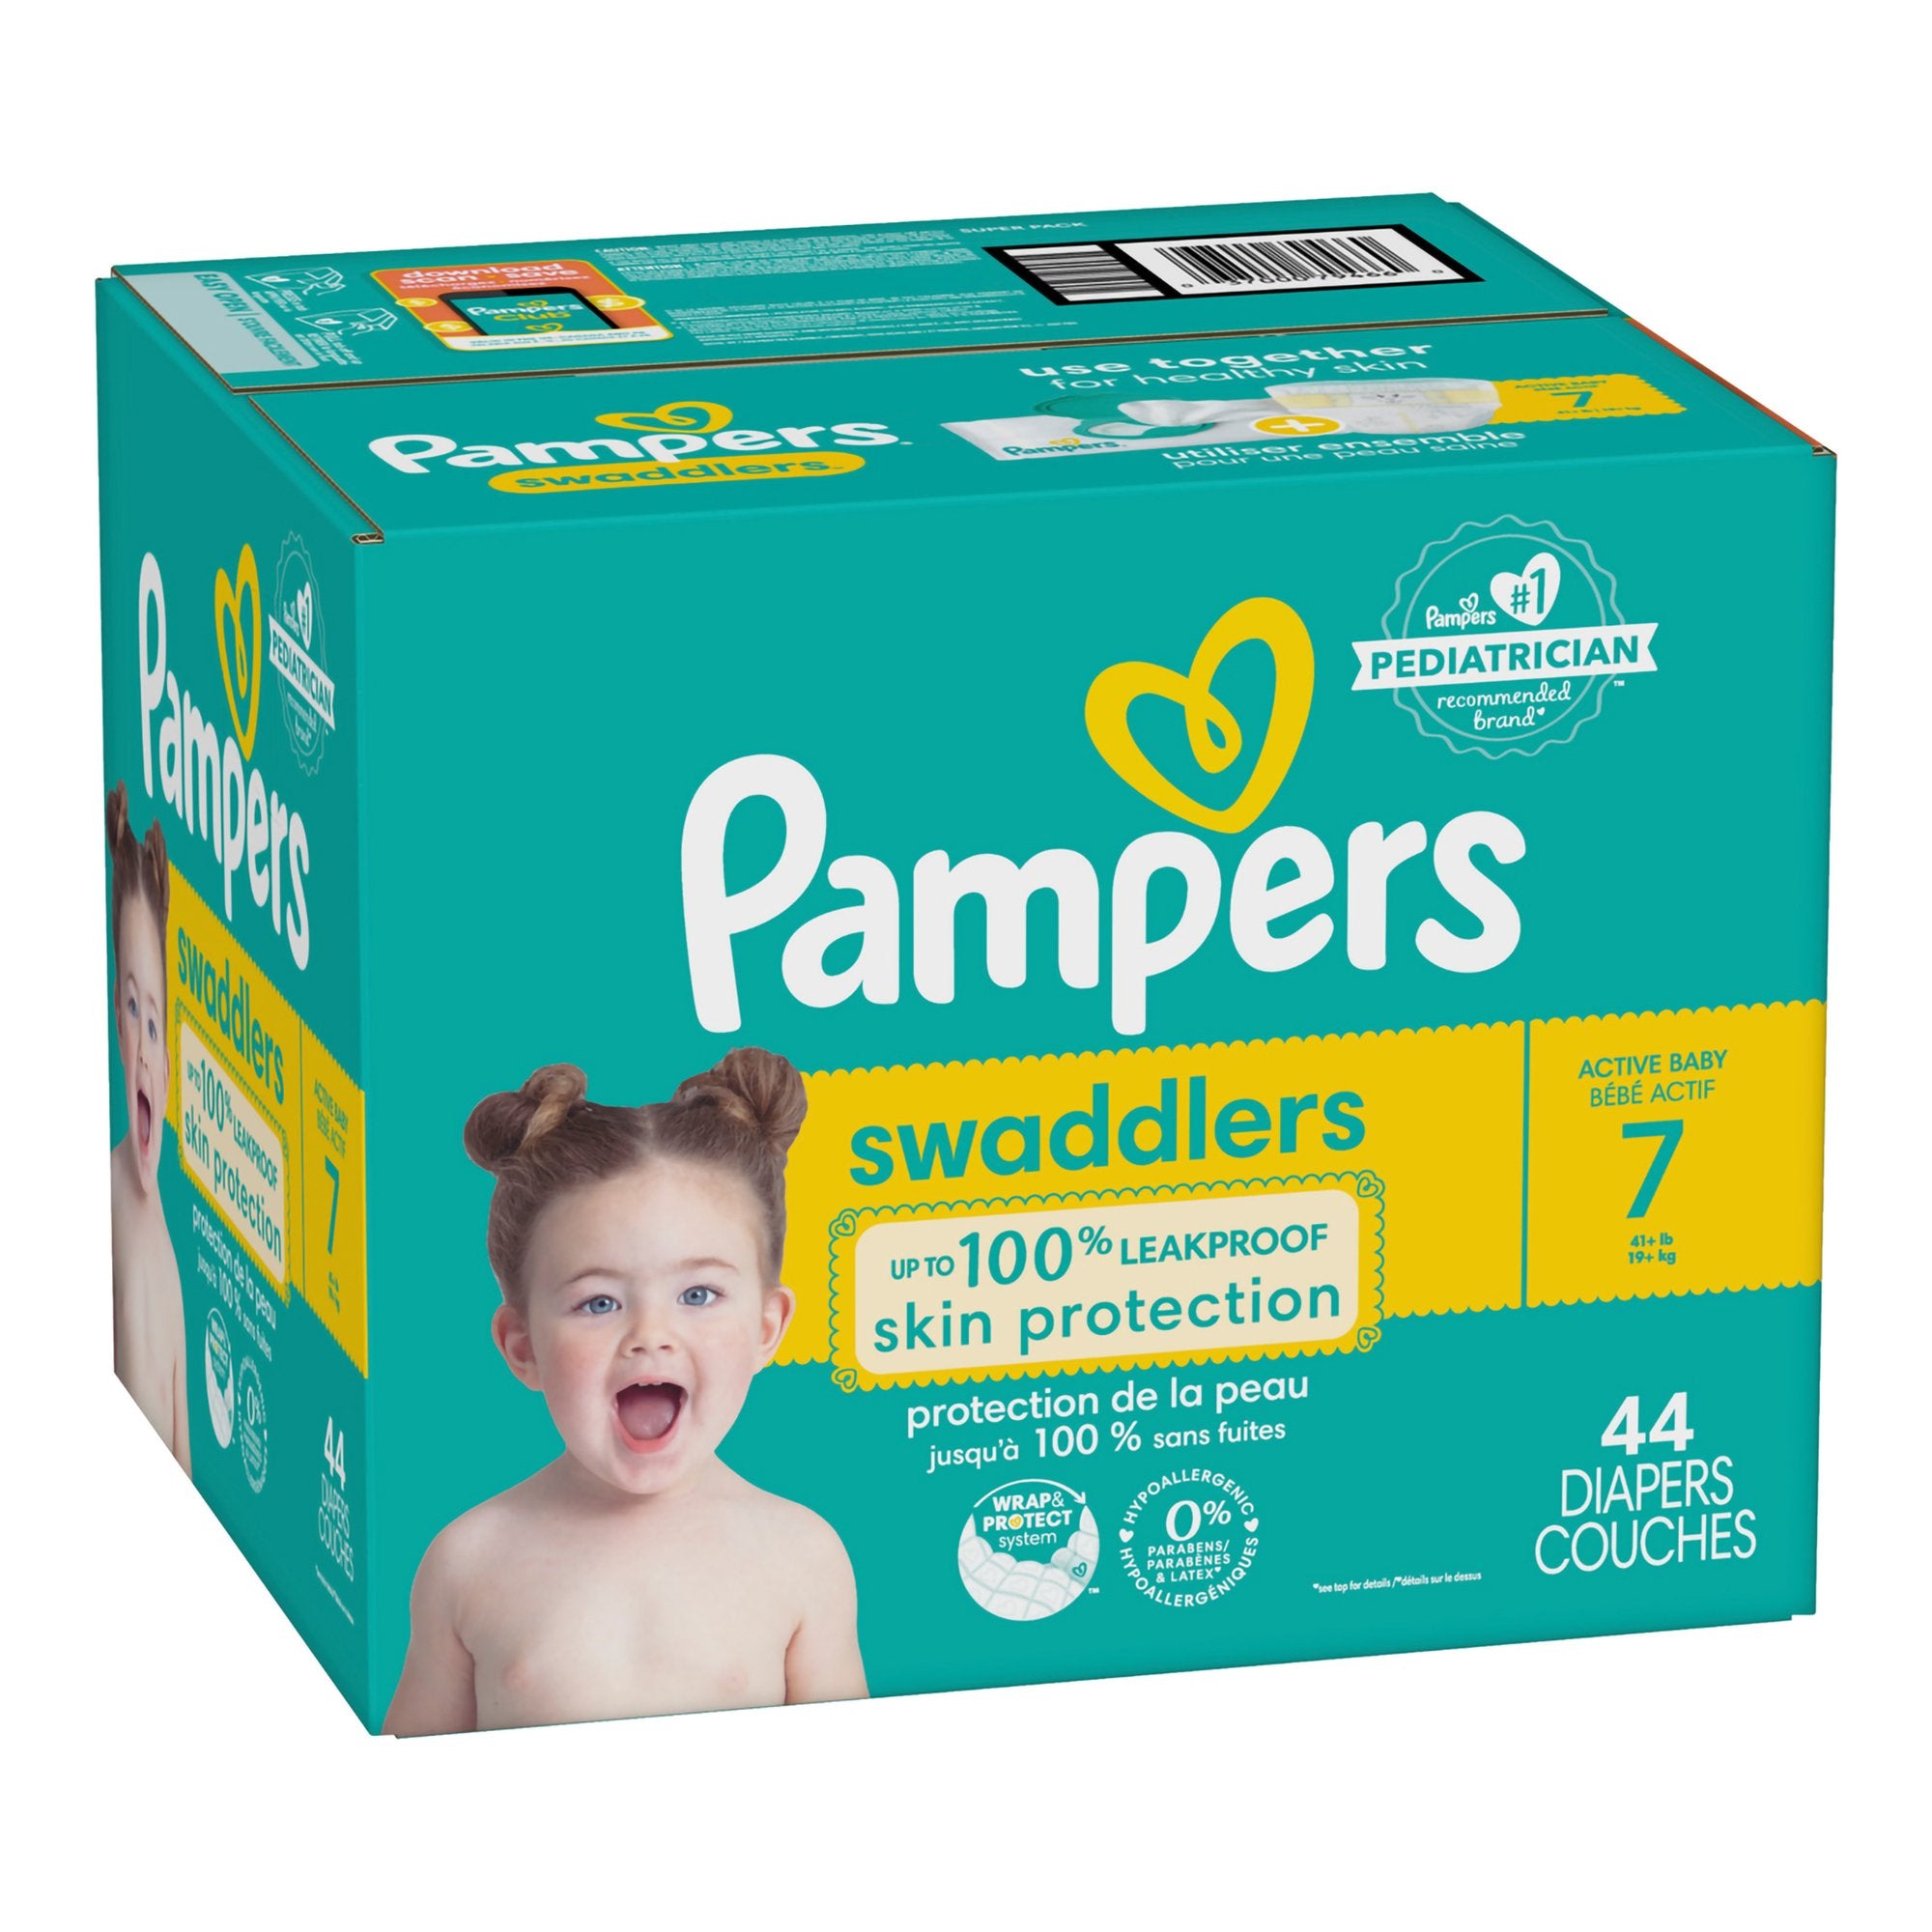 Pampers® Swaddlers™ Diapers, Size 7